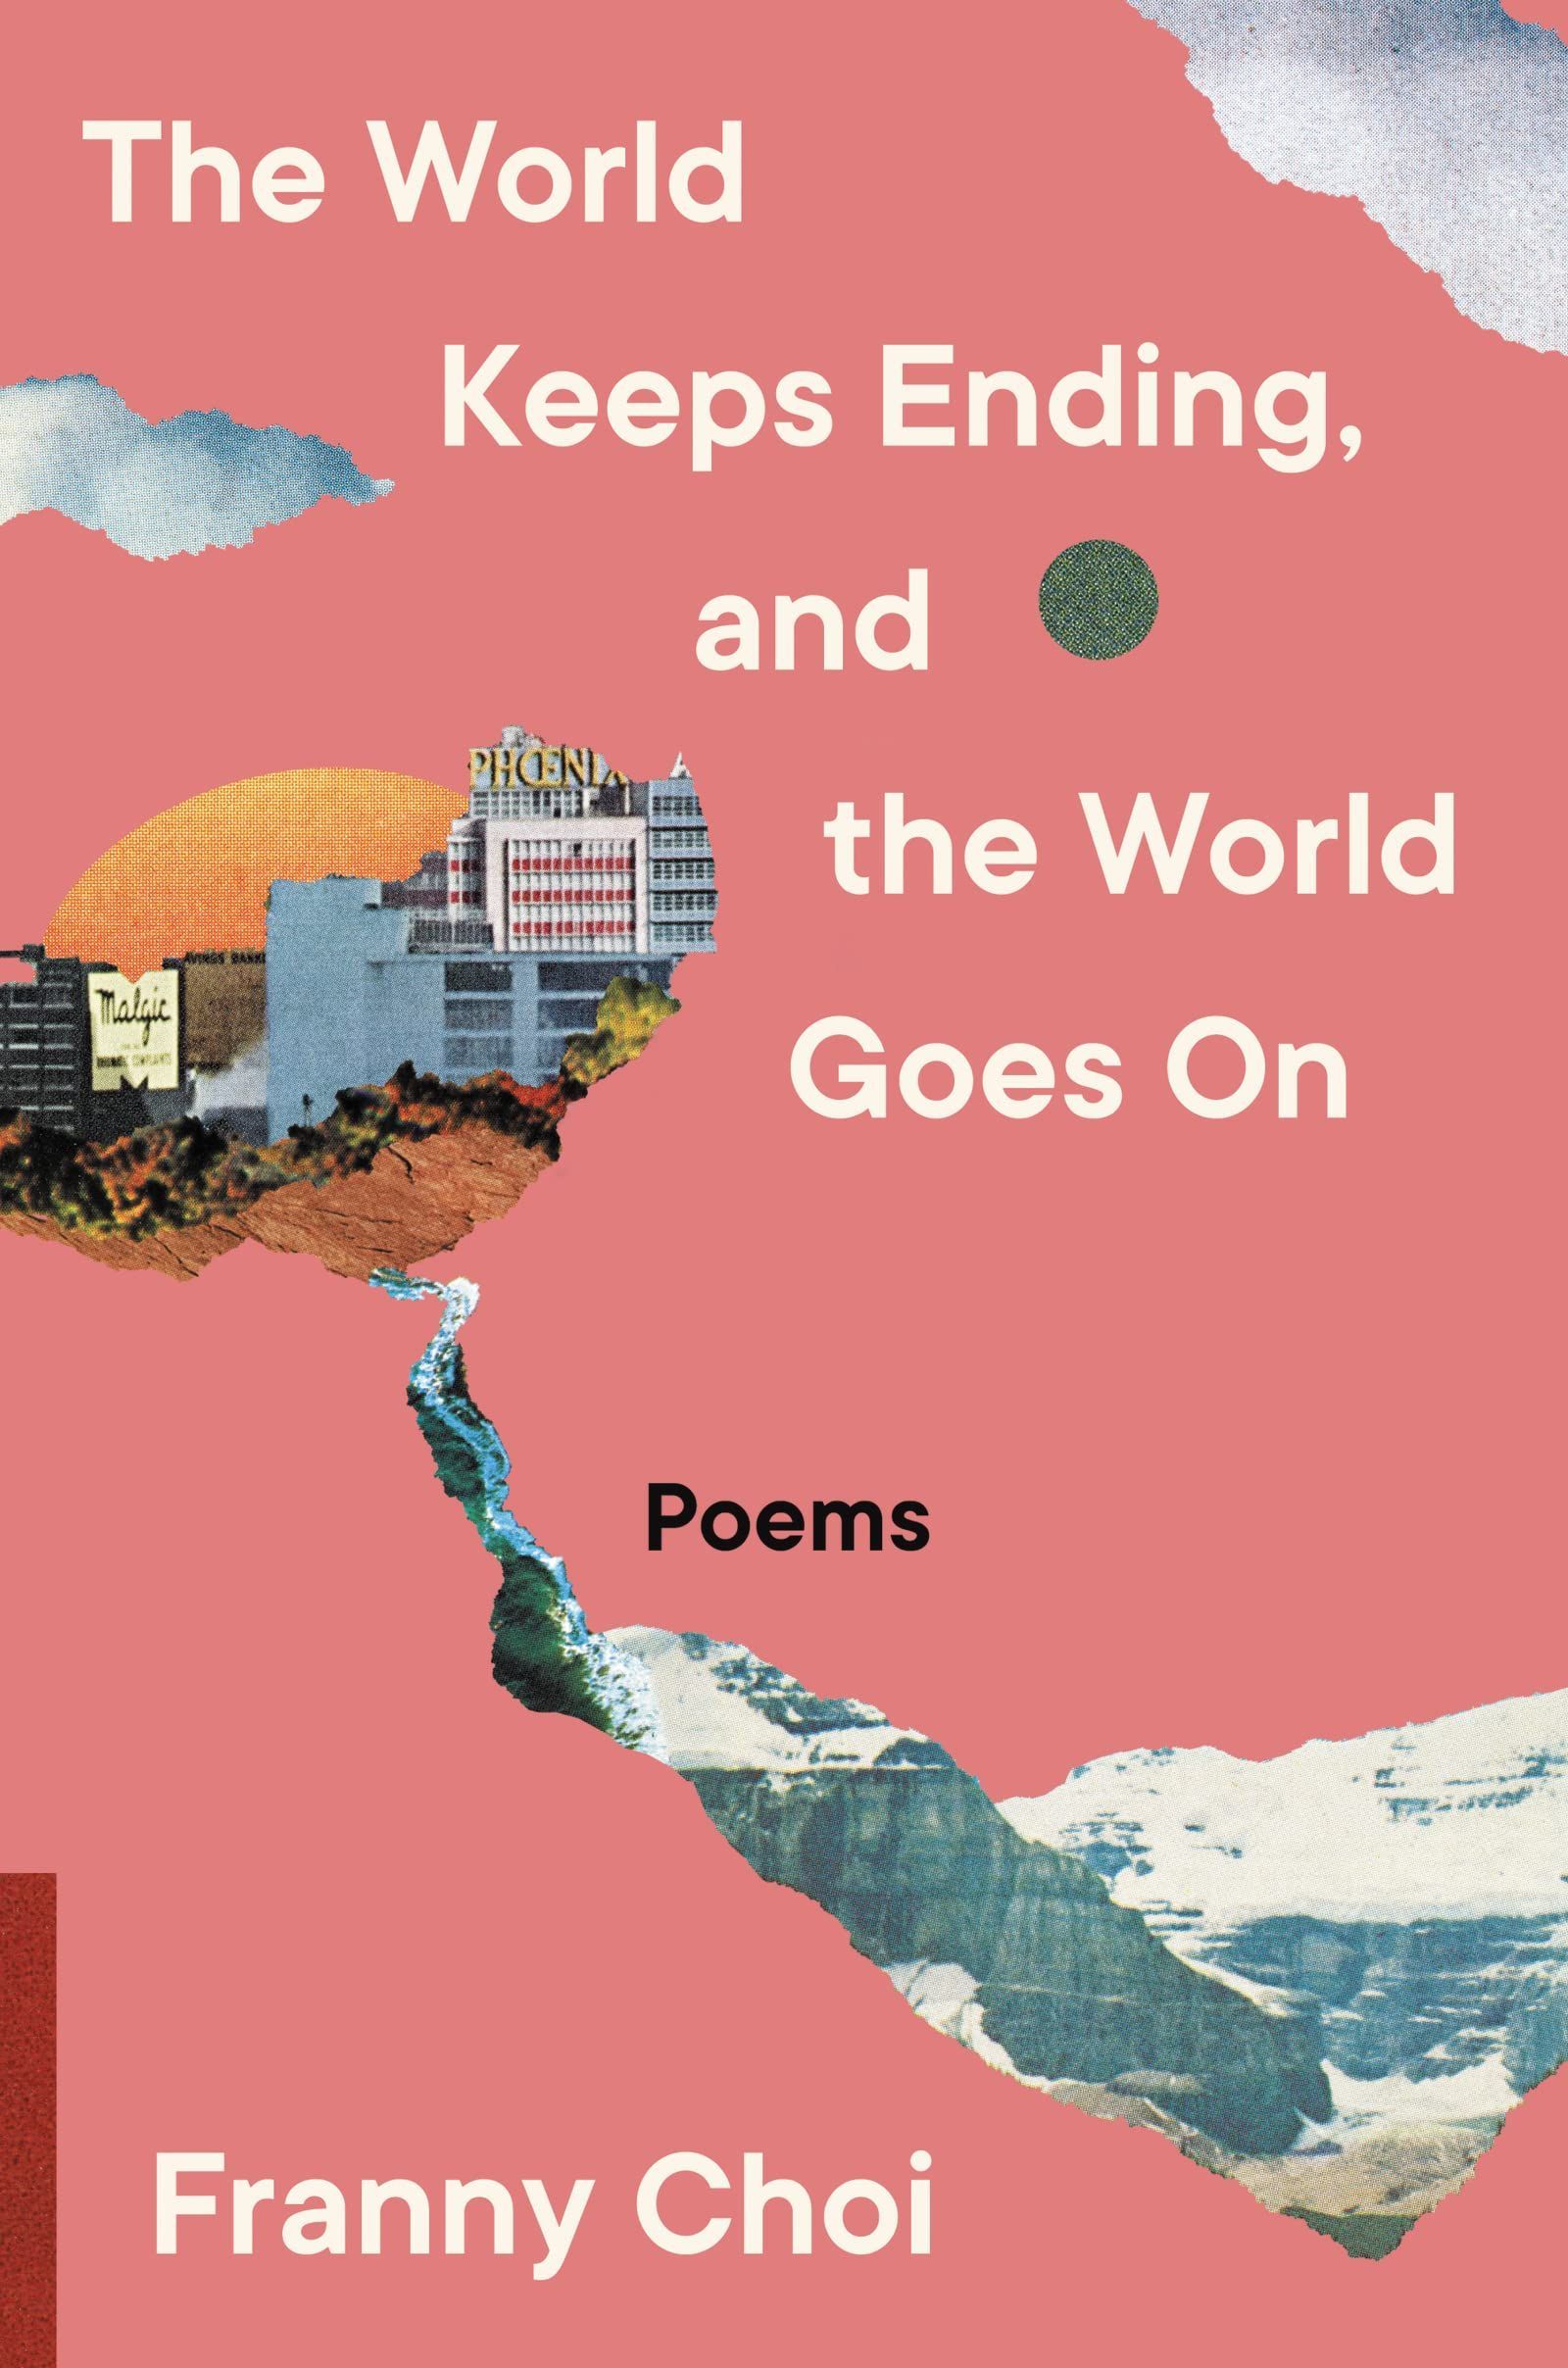 Recovering a World: On Franny Choi’s “The World Keeps Ending, and the World Goes On”